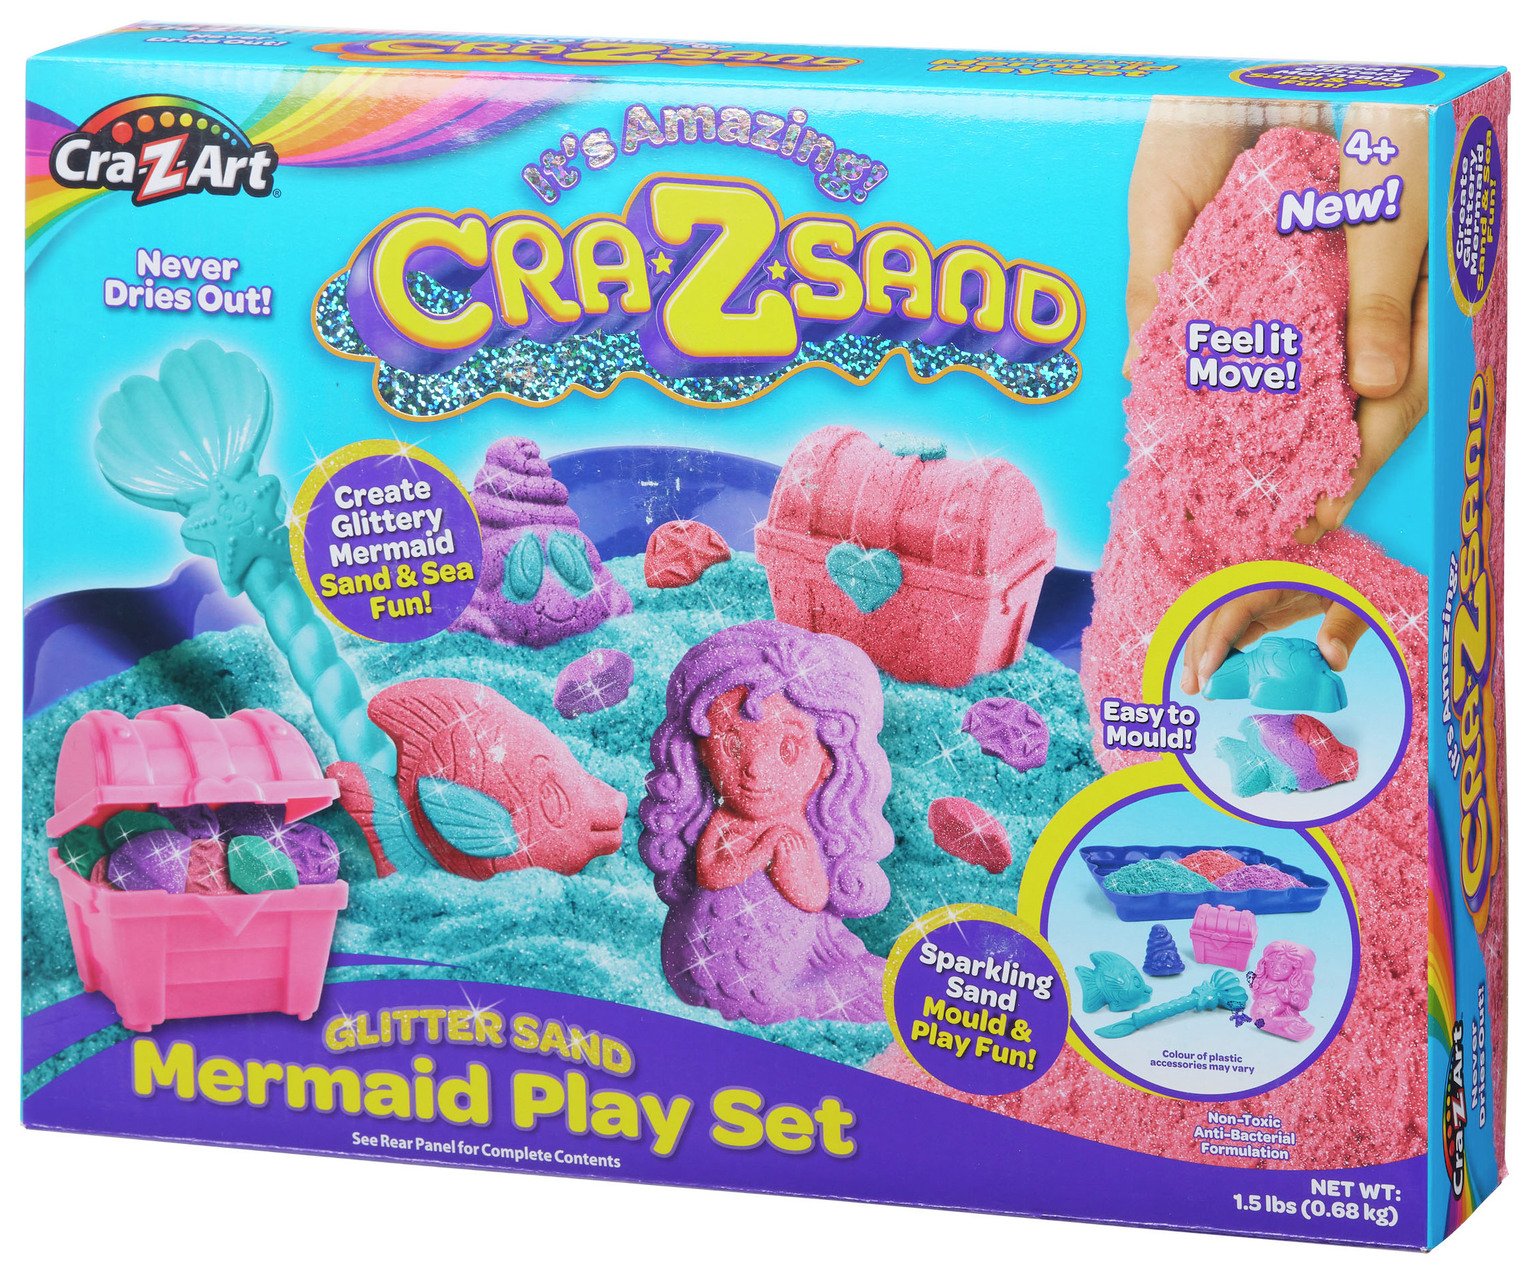 Cra-Z-Sand Mermaid Playset Review